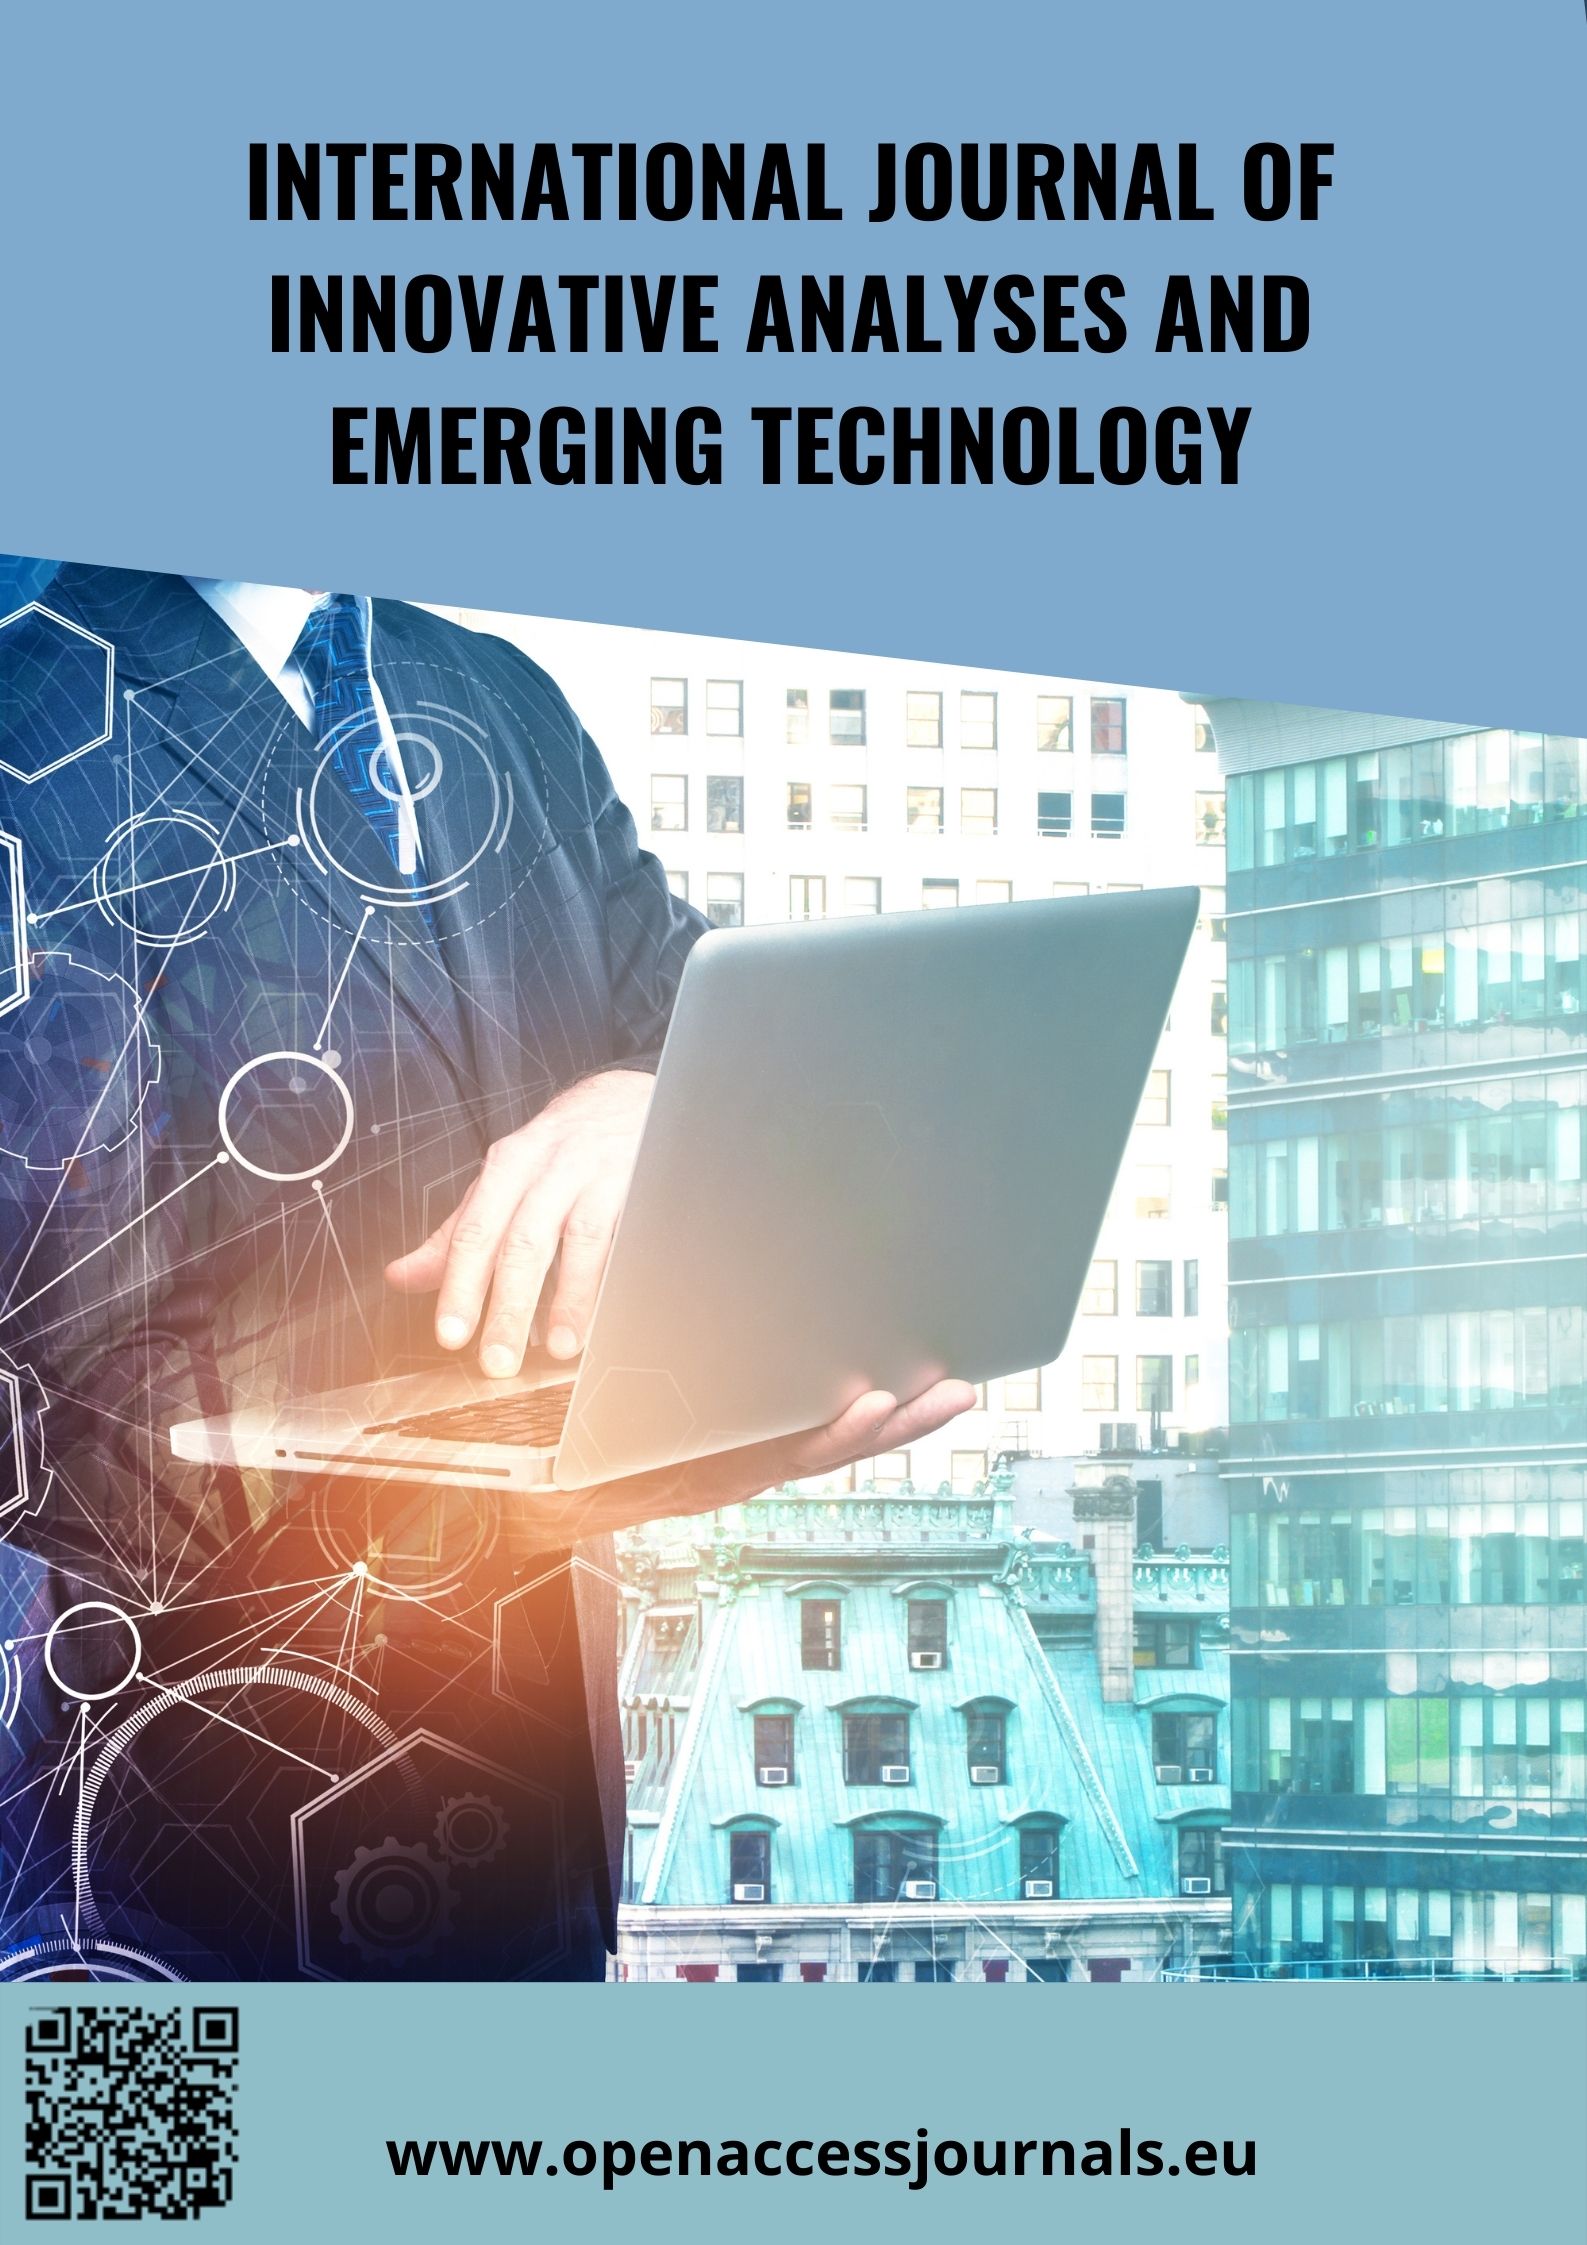 International Journal of Innovative Analyses and Emerging Technology